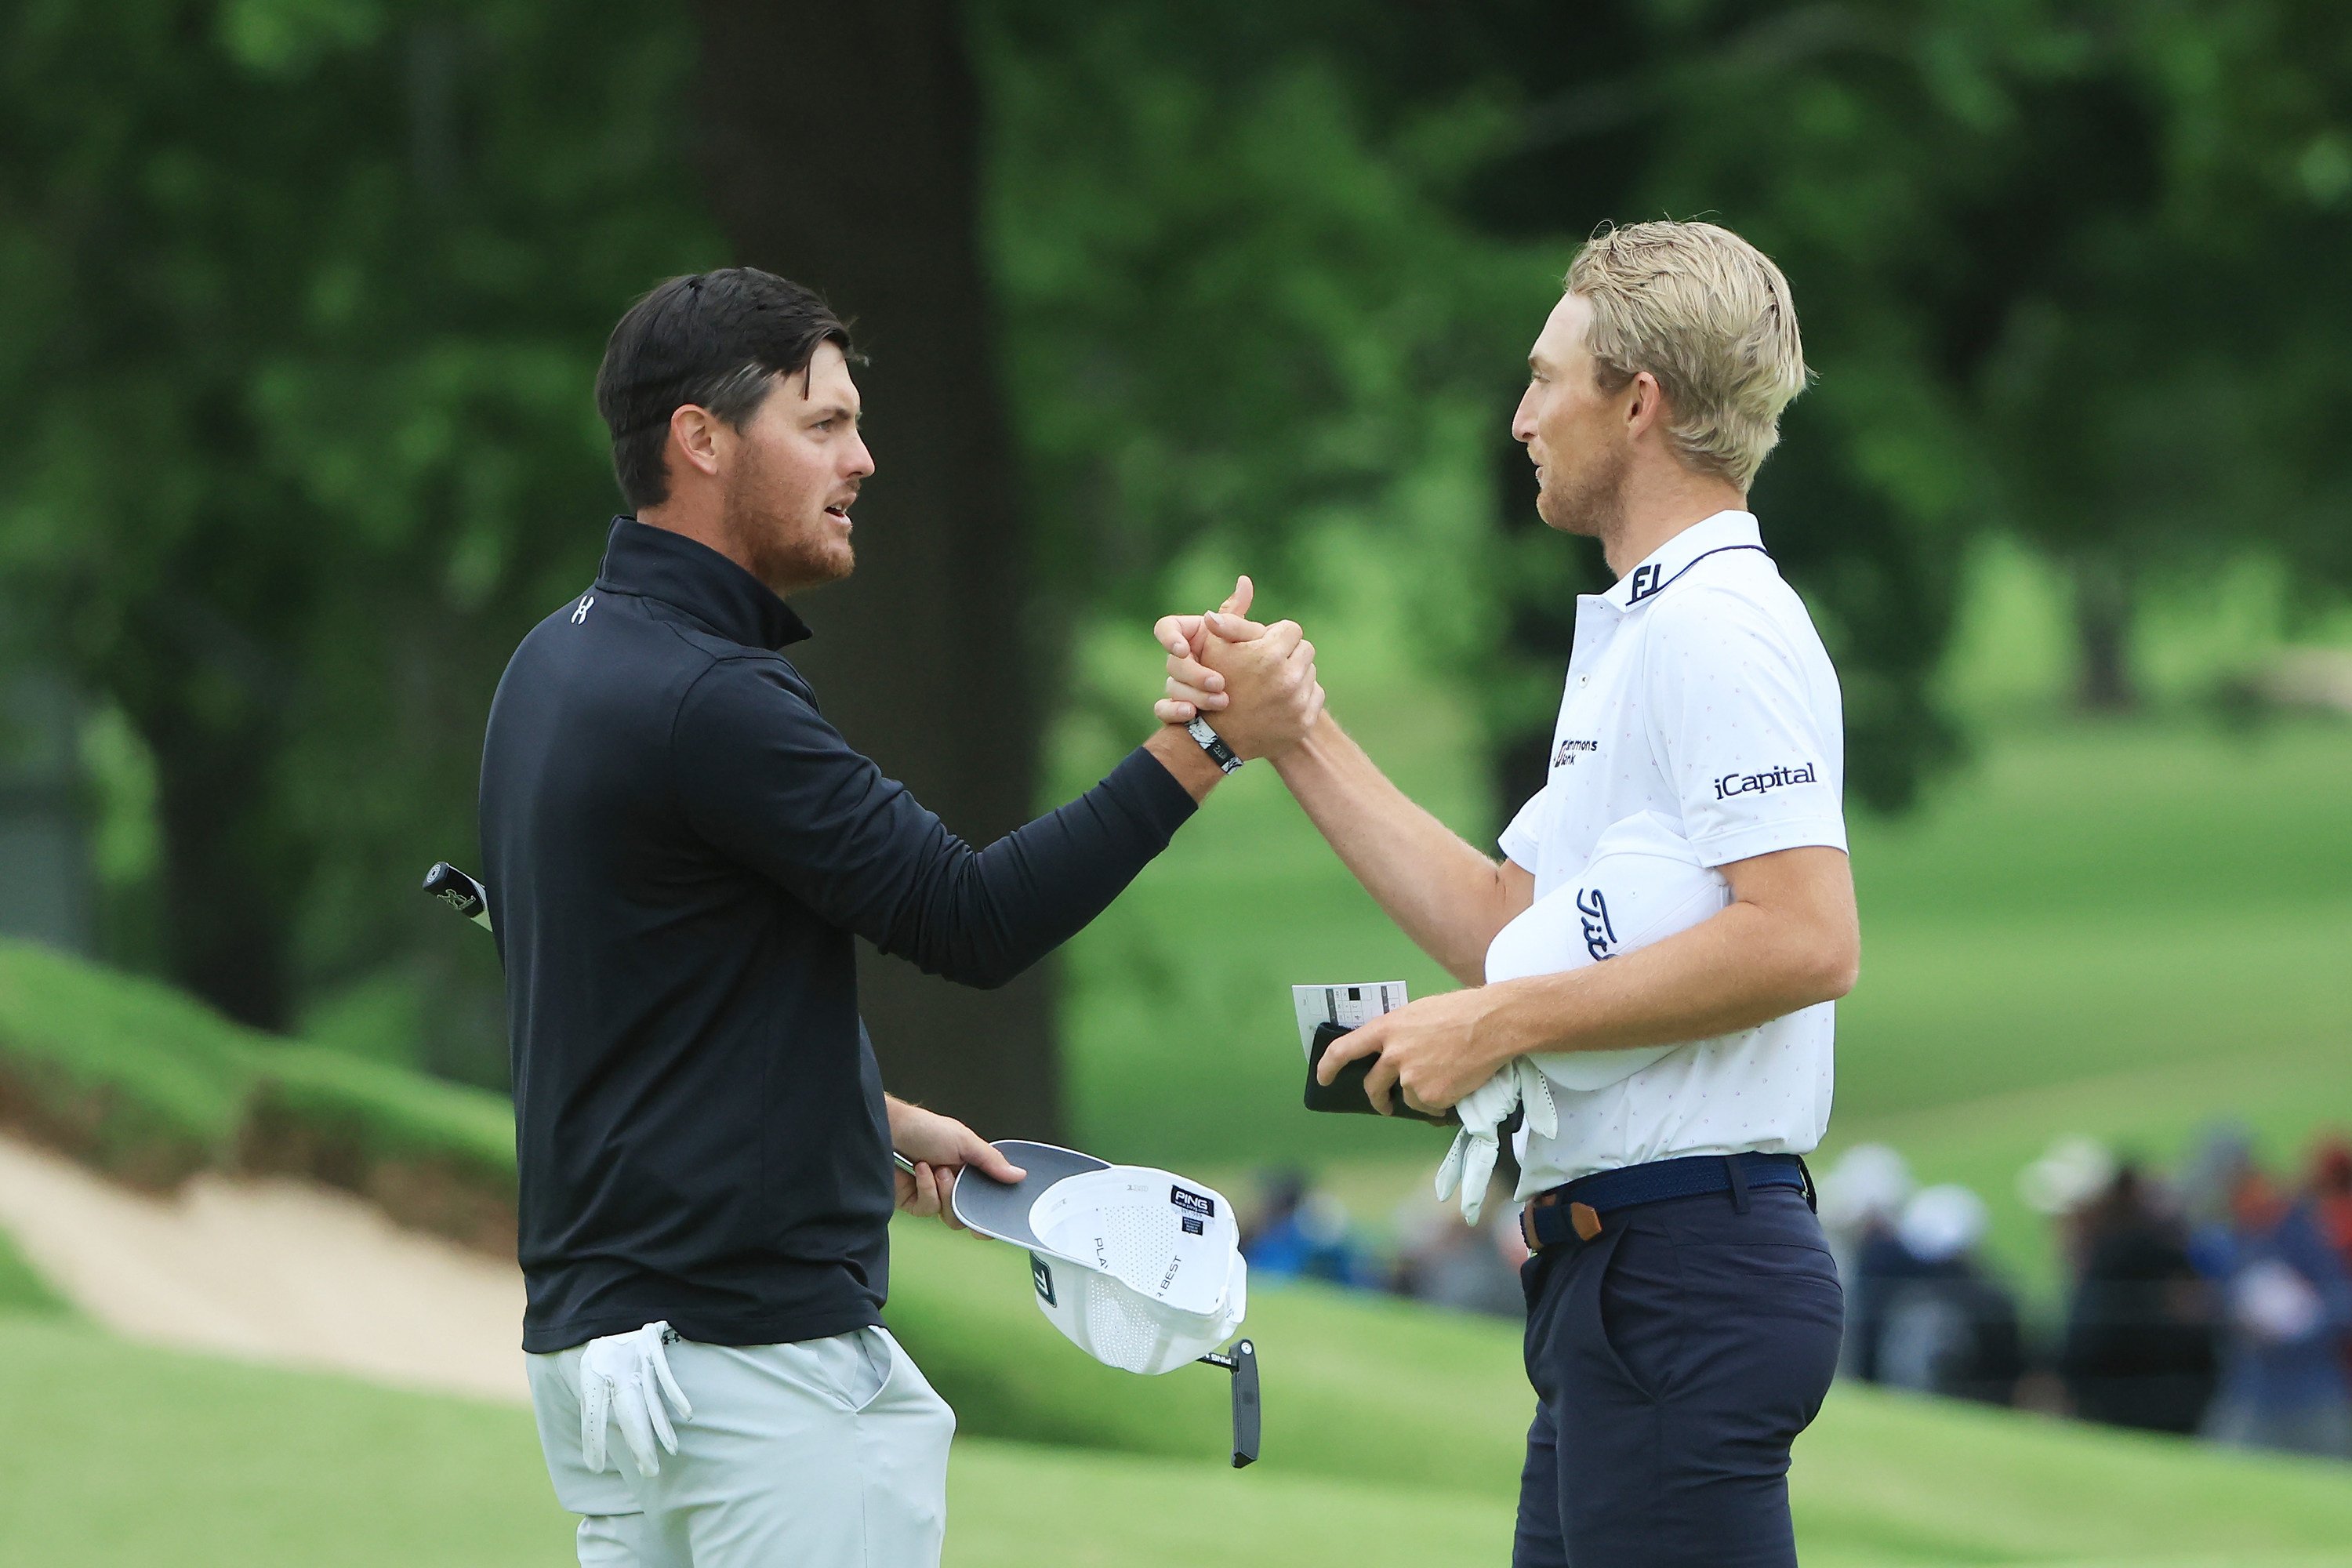 Chile’s Mito Pereira (left) and Will Zalatoris shake hands on the 18th green after the the third round of the PGA Championship. Photo: TNS